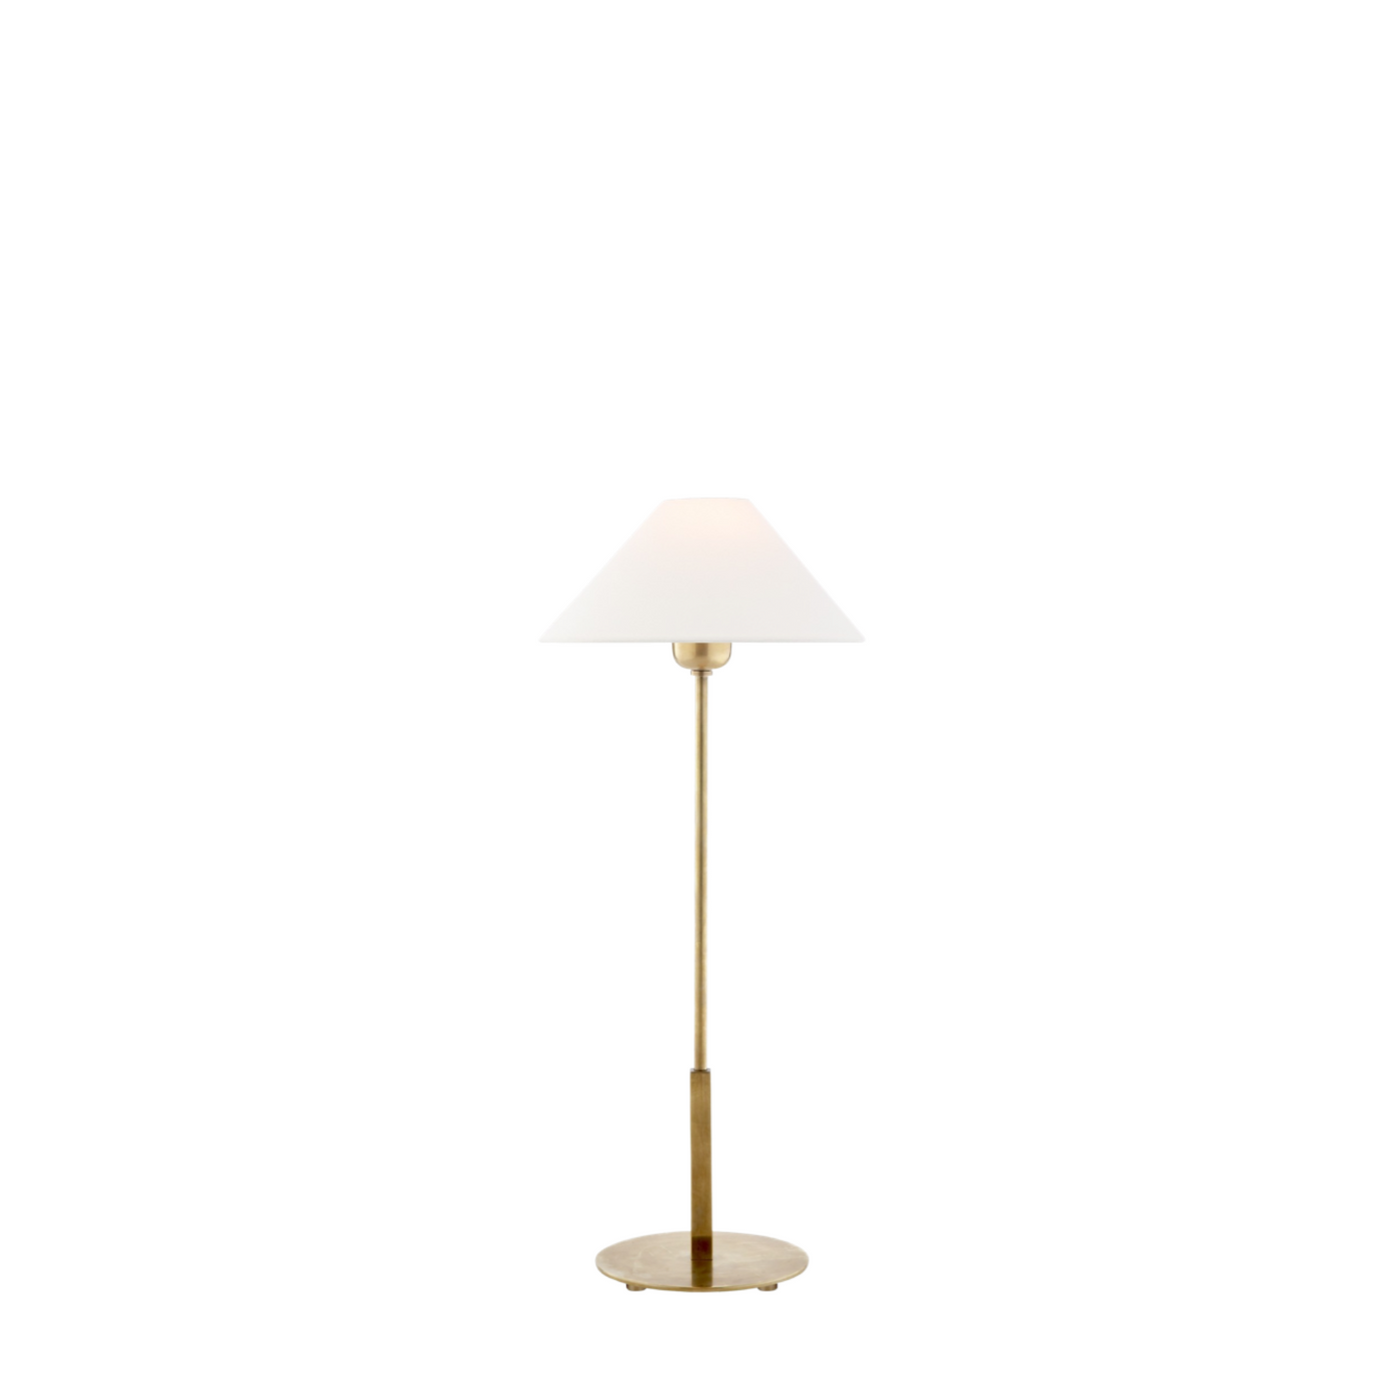 Hackney Table Lamp in Antique Brass Finish | Newport Lamp And Shade | Located in Newport, RI